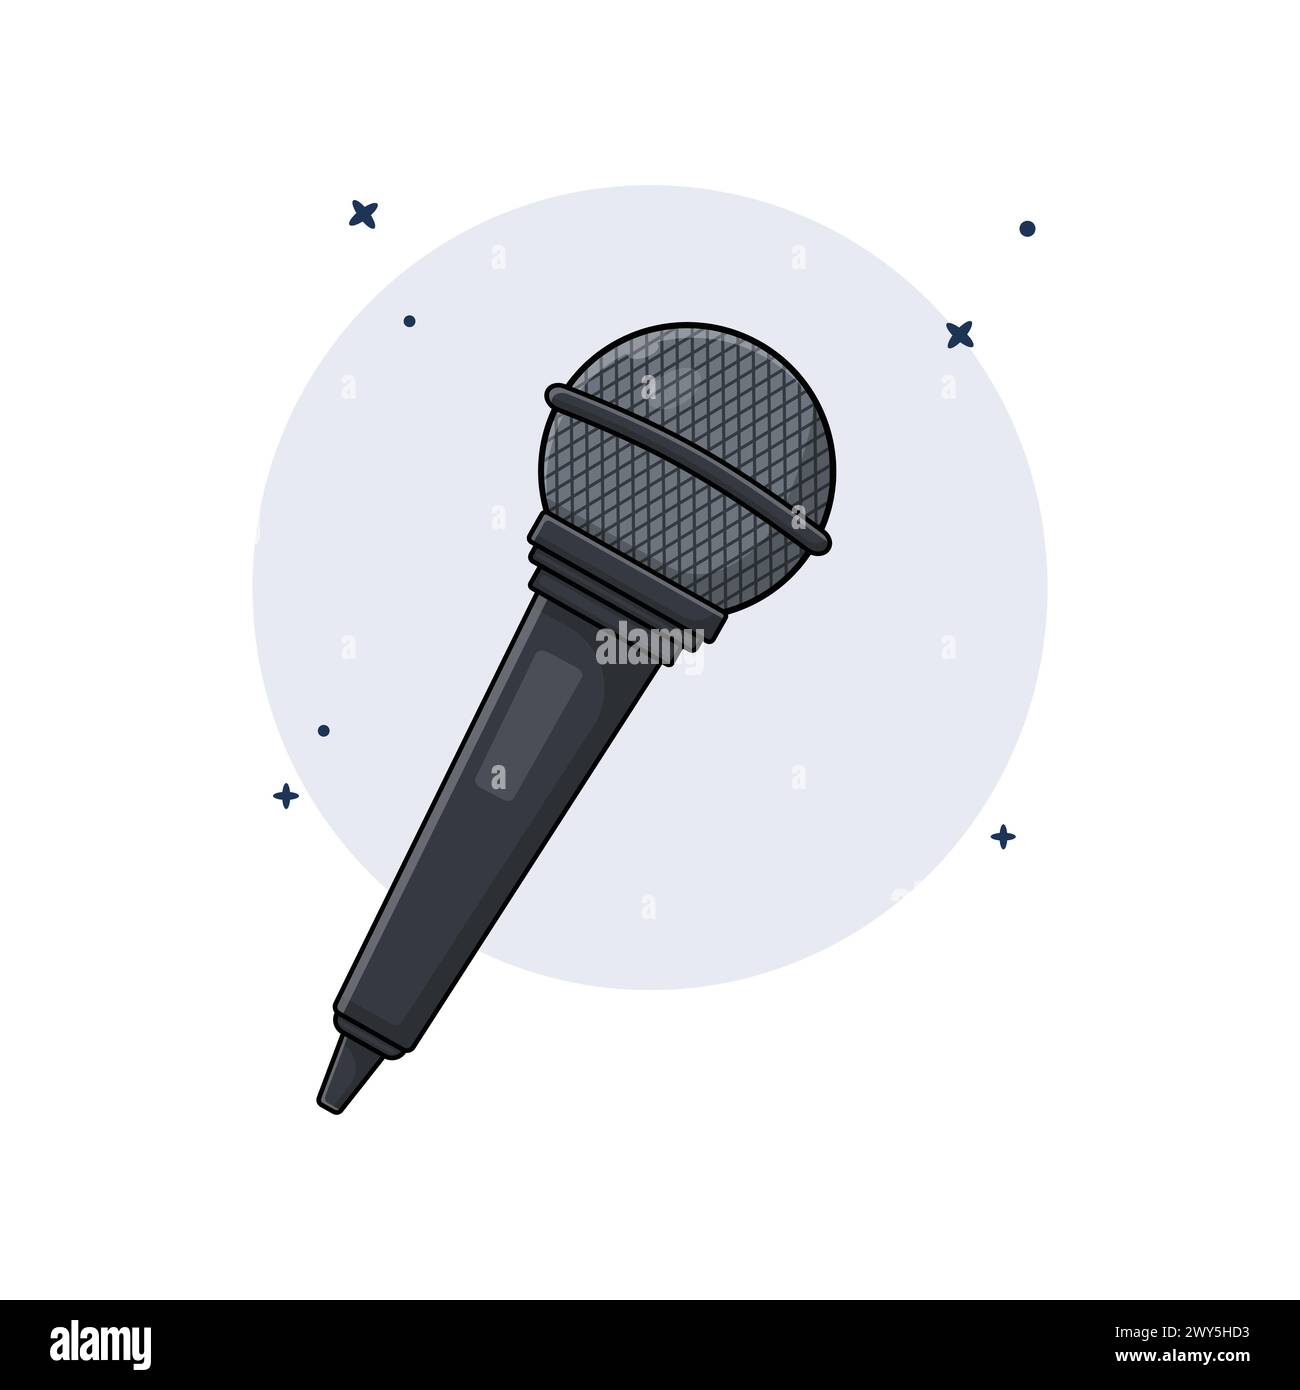 Detailed Stage Microphone Vector Illustration. Sound Recording Equipment Concept Design Stock Vector